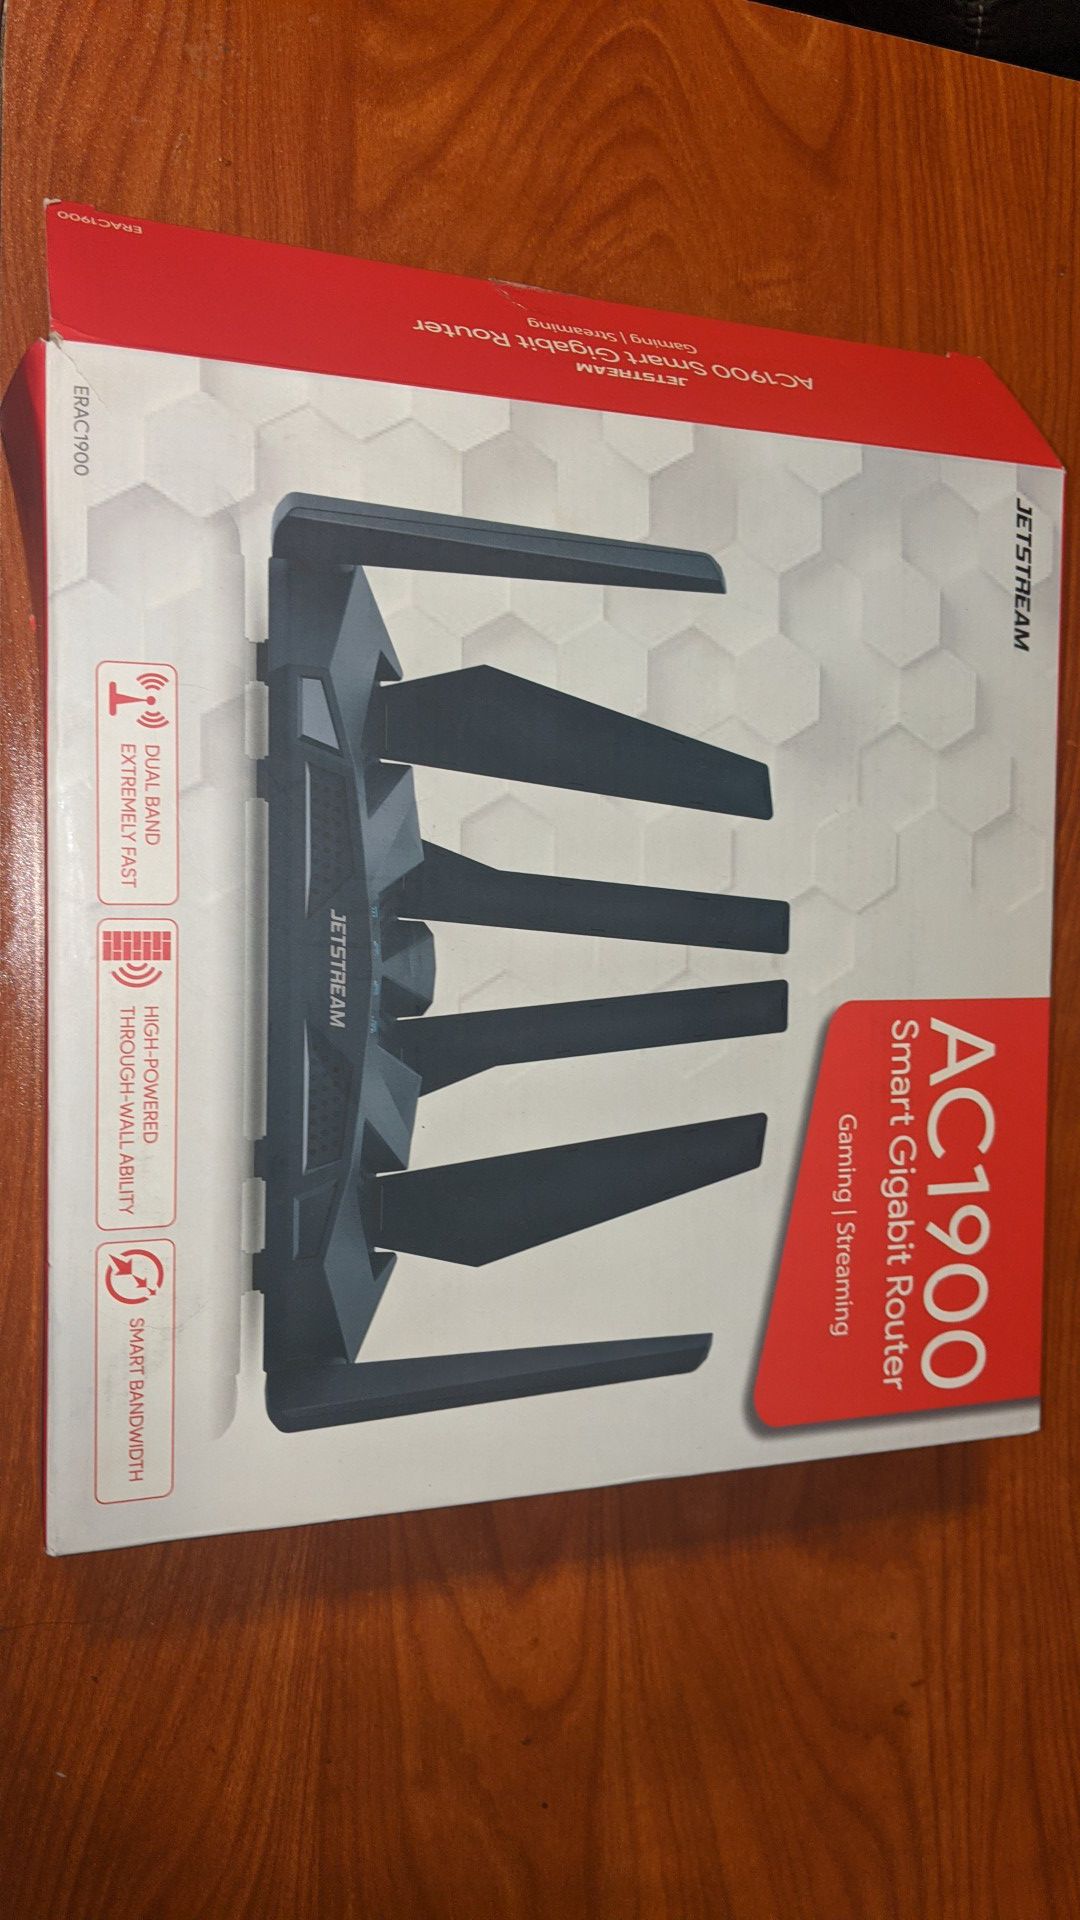 Jetstream AC1900 Dual Band Wi-Fi Router